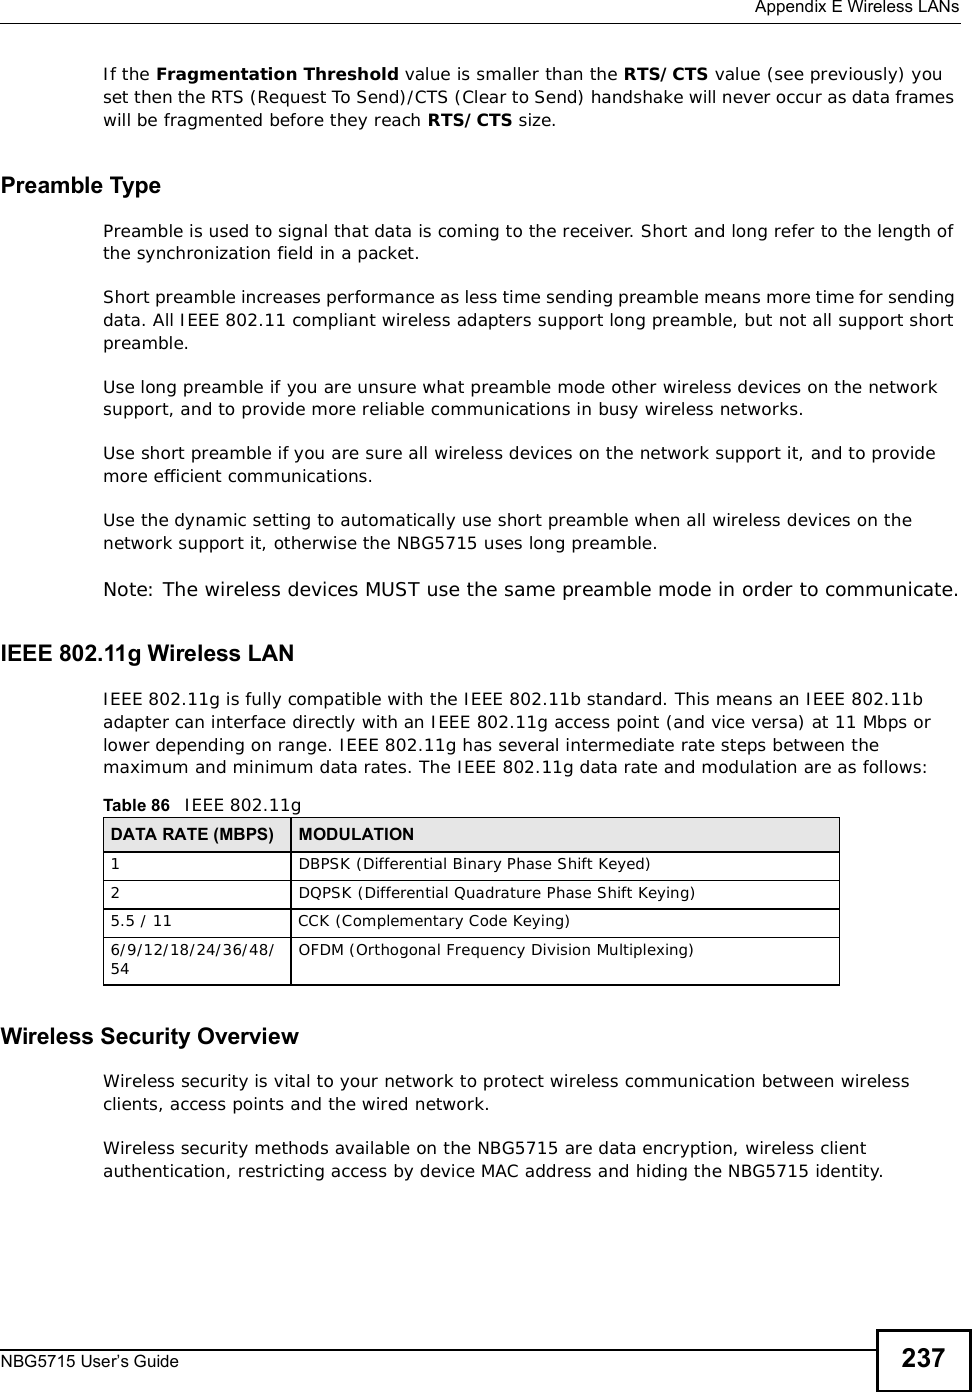  Appendix EWireless LANsNBG5715 User’s Guide 237If the Fragmentation Threshold value is smaller than the RTS/CTS value (see previously) you set then the RTS (Request To Send)/CTS (Clear to Send) handshake will never occur as data frames will be fragmented before they reach RTS/CTS size.Preamble TypePreamble is used to signal that data is coming to the receiver. Short and long refer to the length of the synchronization field in a packet.Short preamble increases performance as less time sending preamble means more time for sending data. All IEEE 802.11 compliant wireless adapters support long preamble, but not all support short preamble. Use long preamble if you are unsure what preamble mode other wireless devices on the network support, and to provide more reliable communications in busy wireless networks. Use short preamble if you are sure all wireless devices on the network support it, and to provide more efficient communications.Use the dynamic setting to automatically use short preamble when all wireless devices on the network support it, otherwise the NBG5715 uses long preamble.Note: The wireless devices MUSTuse the same preamble mode in order to communicate.IEEE 802.11g Wireless LANIEEE 802.11g is fully compatible with the IEEE 802.11b standard. This means an IEEE 802.11b adapter can interface directly with an IEEE 802.11g access point (and vice versa) at 11 Mbps or lower depending on range. IEEE 802.11g has several intermediate rate steps between the maximum and minimum data rates. The IEEE 802.11g data rate and modulation are as follows:Wireless Security OverviewWireless security is vital to your network to protect wireless communication between wireless clients, access points and the wired network.Wireless security methods available on the NBG5715 are data encryption, wireless client authentication, restricting access by device MAC address and hiding the NBG5715 identity.Table 86   IEEE 802.11gDATA RATE (MBPS) MODULATION1DBPSK (Differential Binary Phase Shift Keyed)2DQPSK (Differential Quadrature Phase Shift Keying)5.5 / 11CCK (Complementary Code Keying) 6/9/12/18/24/36/48/54 OFDM (Orthogonal Frequency Division Multiplexing) 